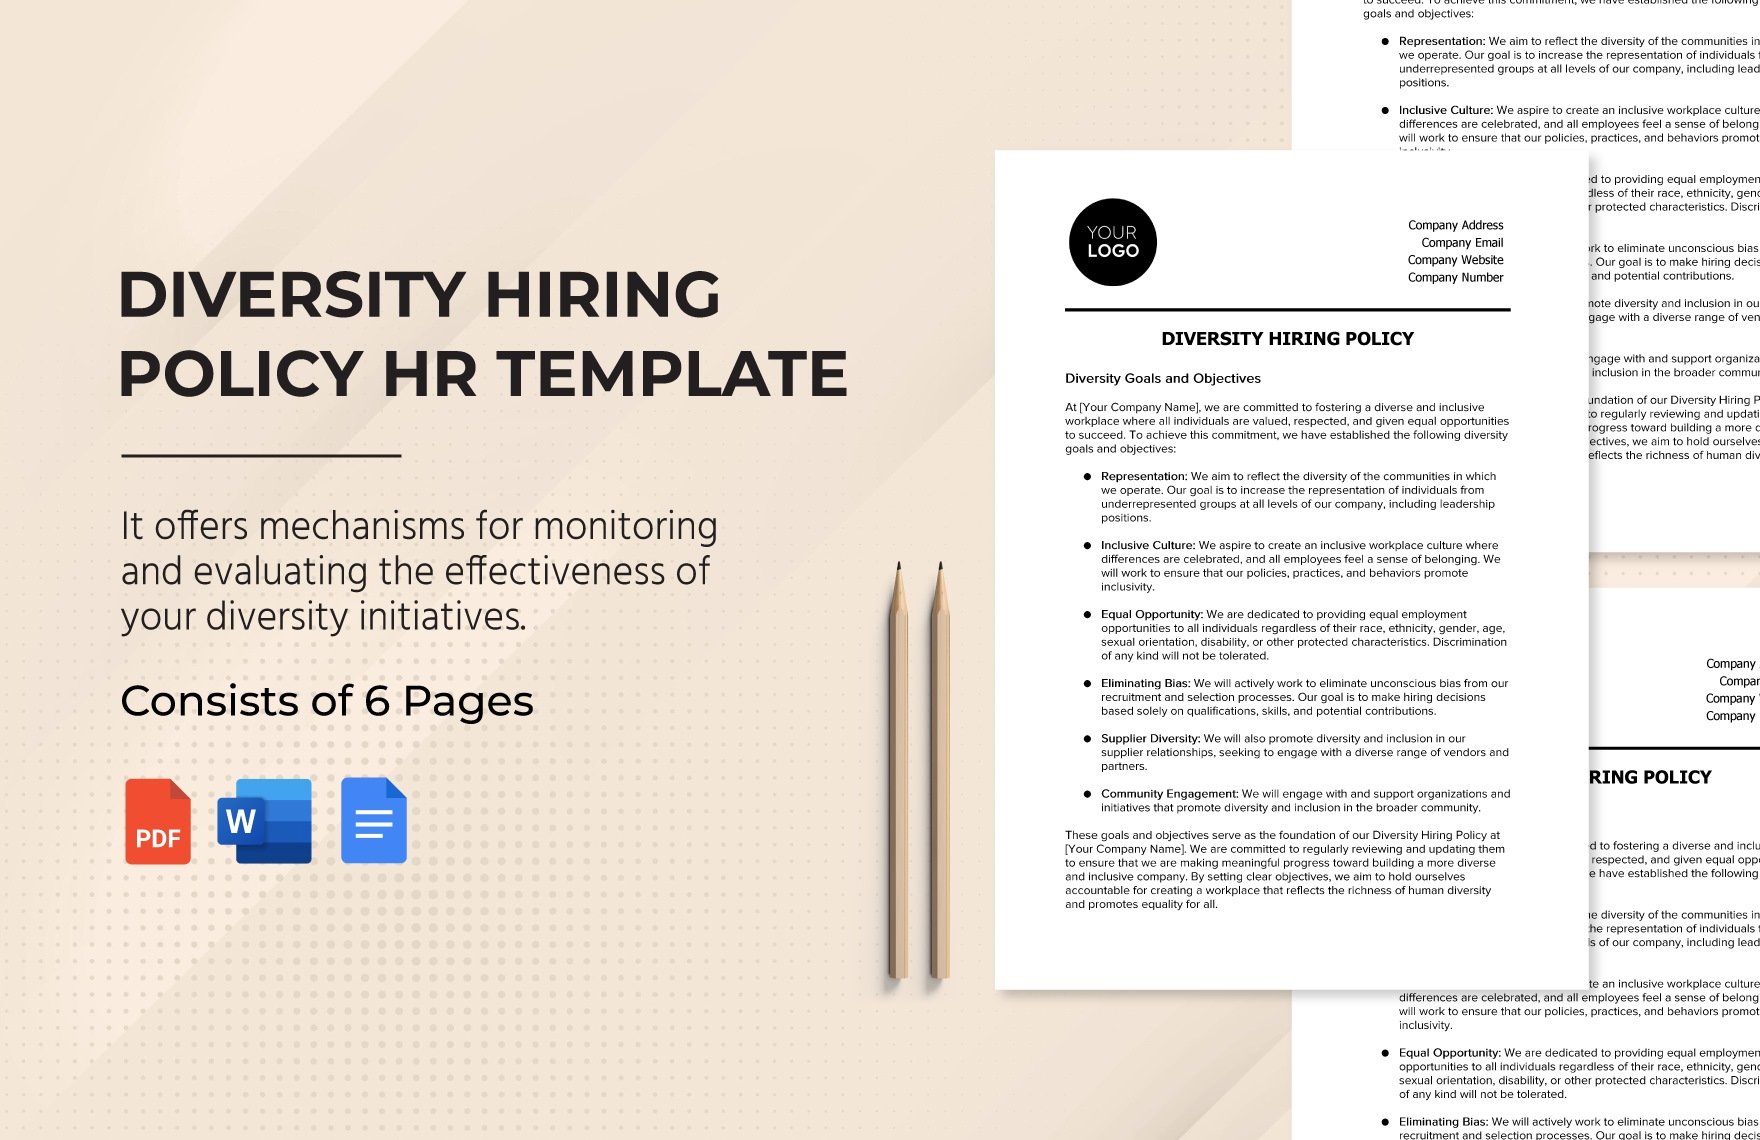 diversity-hiring-policy-hr-template